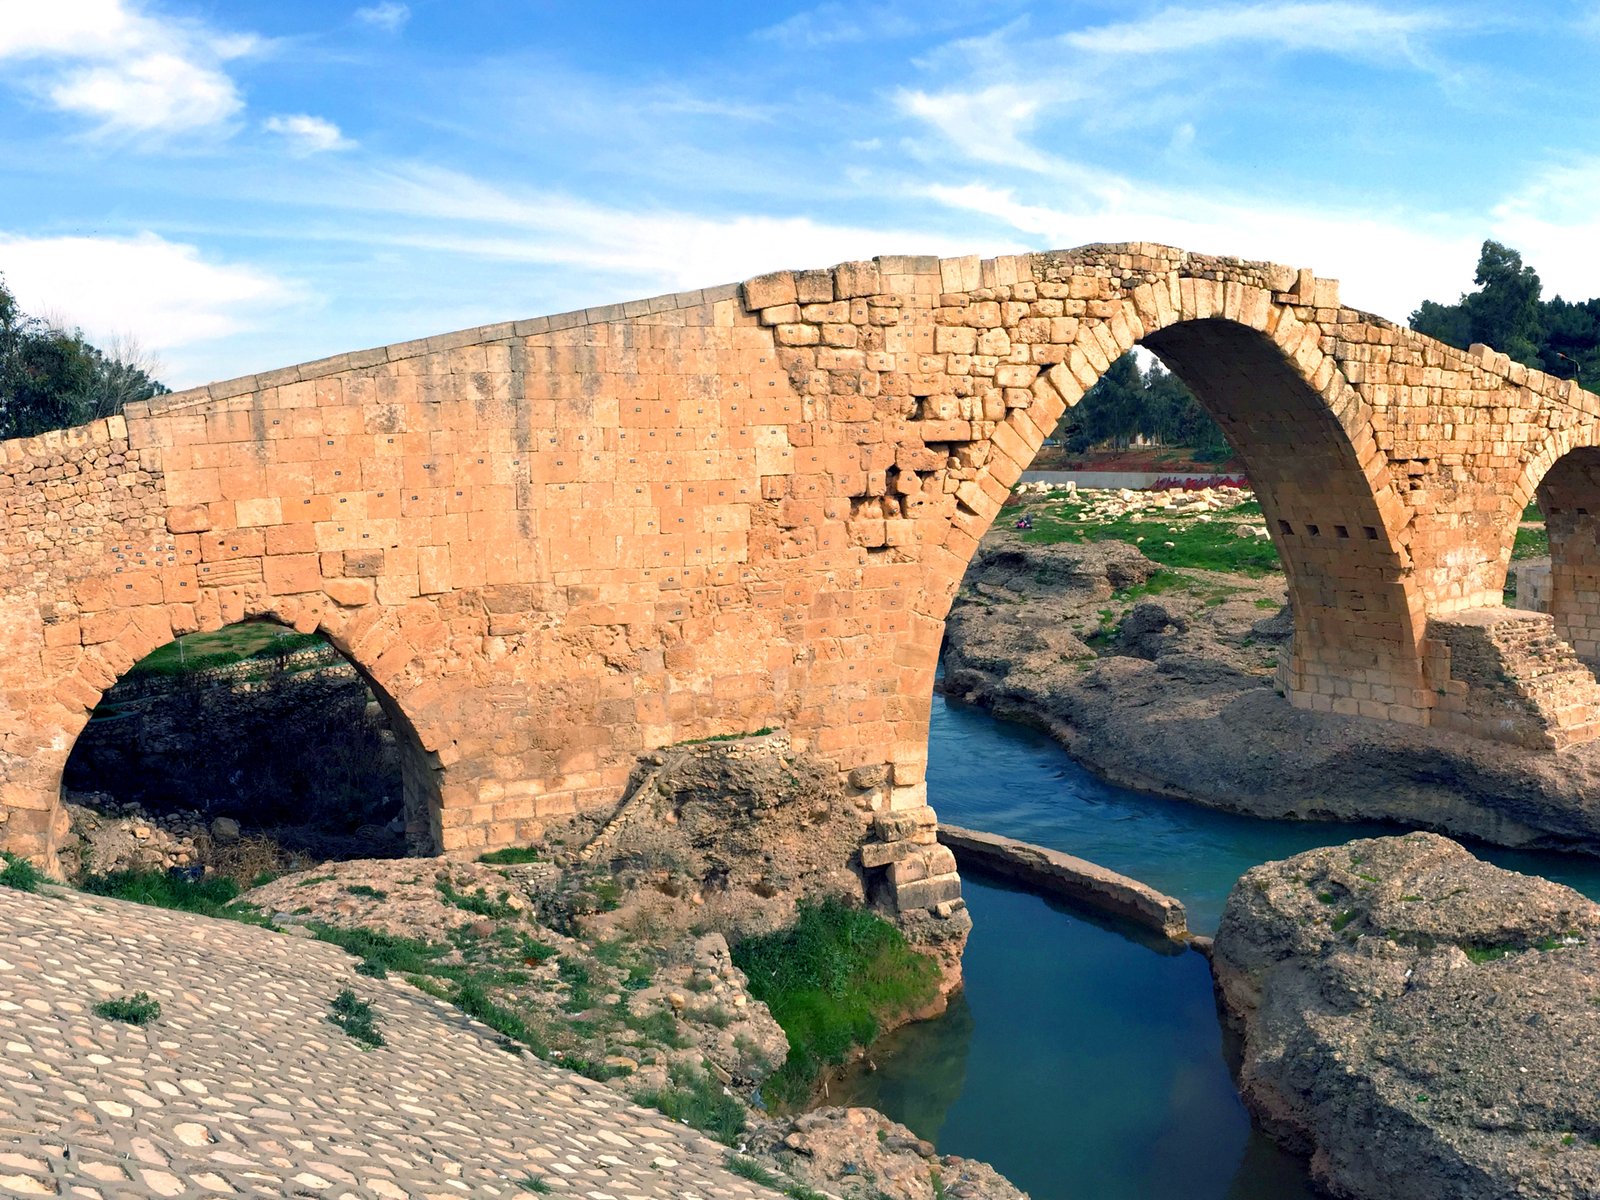 A historic bridge&nbsp;in&nbsp;Dohuk, where the oldest industrial wine press has been excavated.&nbsp;